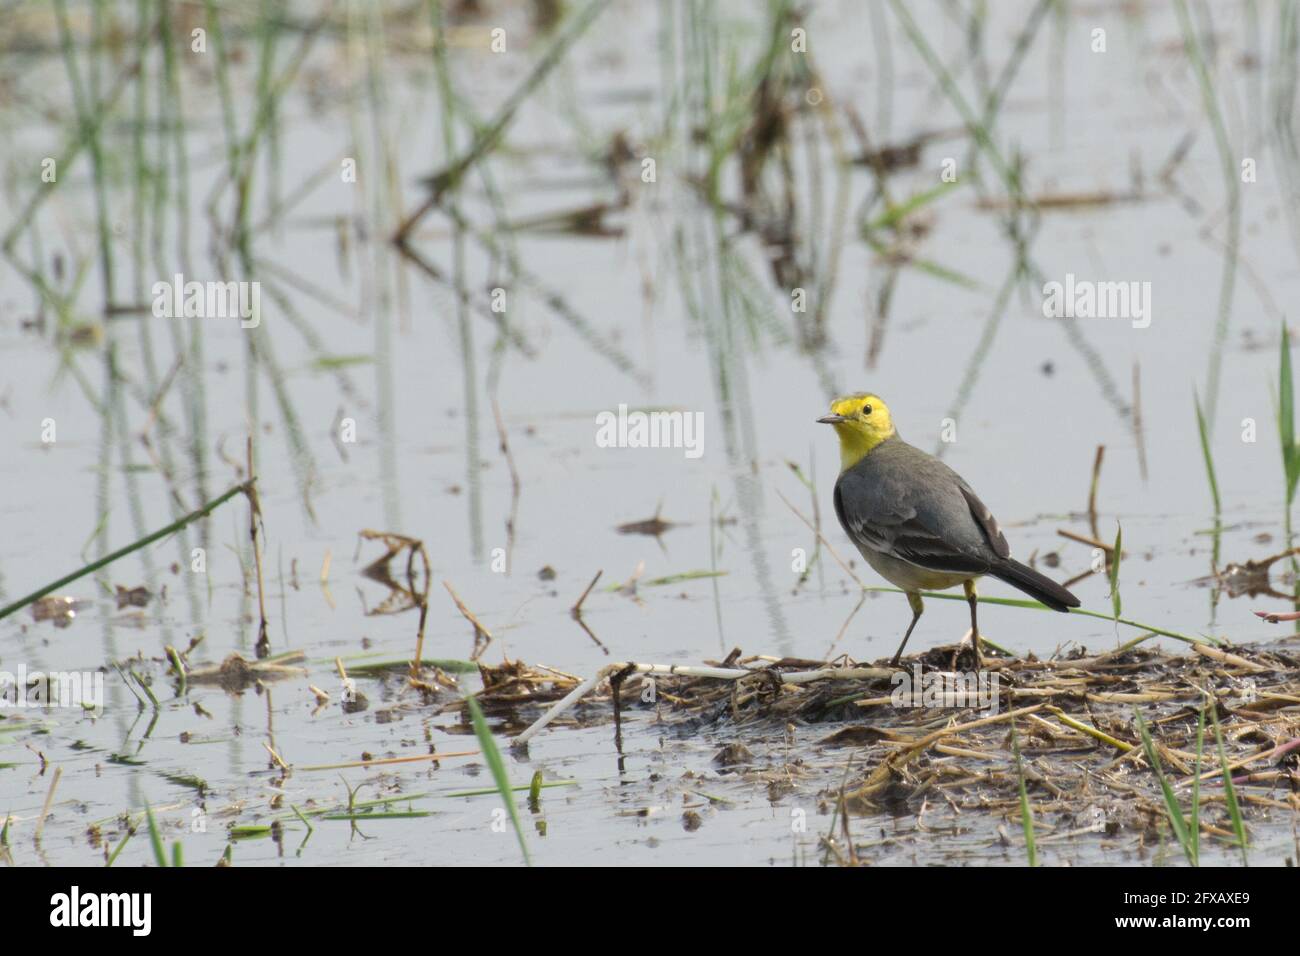 Yellow wagtail bird, scientific name - Motacilla flava, sitting on wetland ground. It is the early winter bird of India. Stock image shot at daytime, Stock Photo